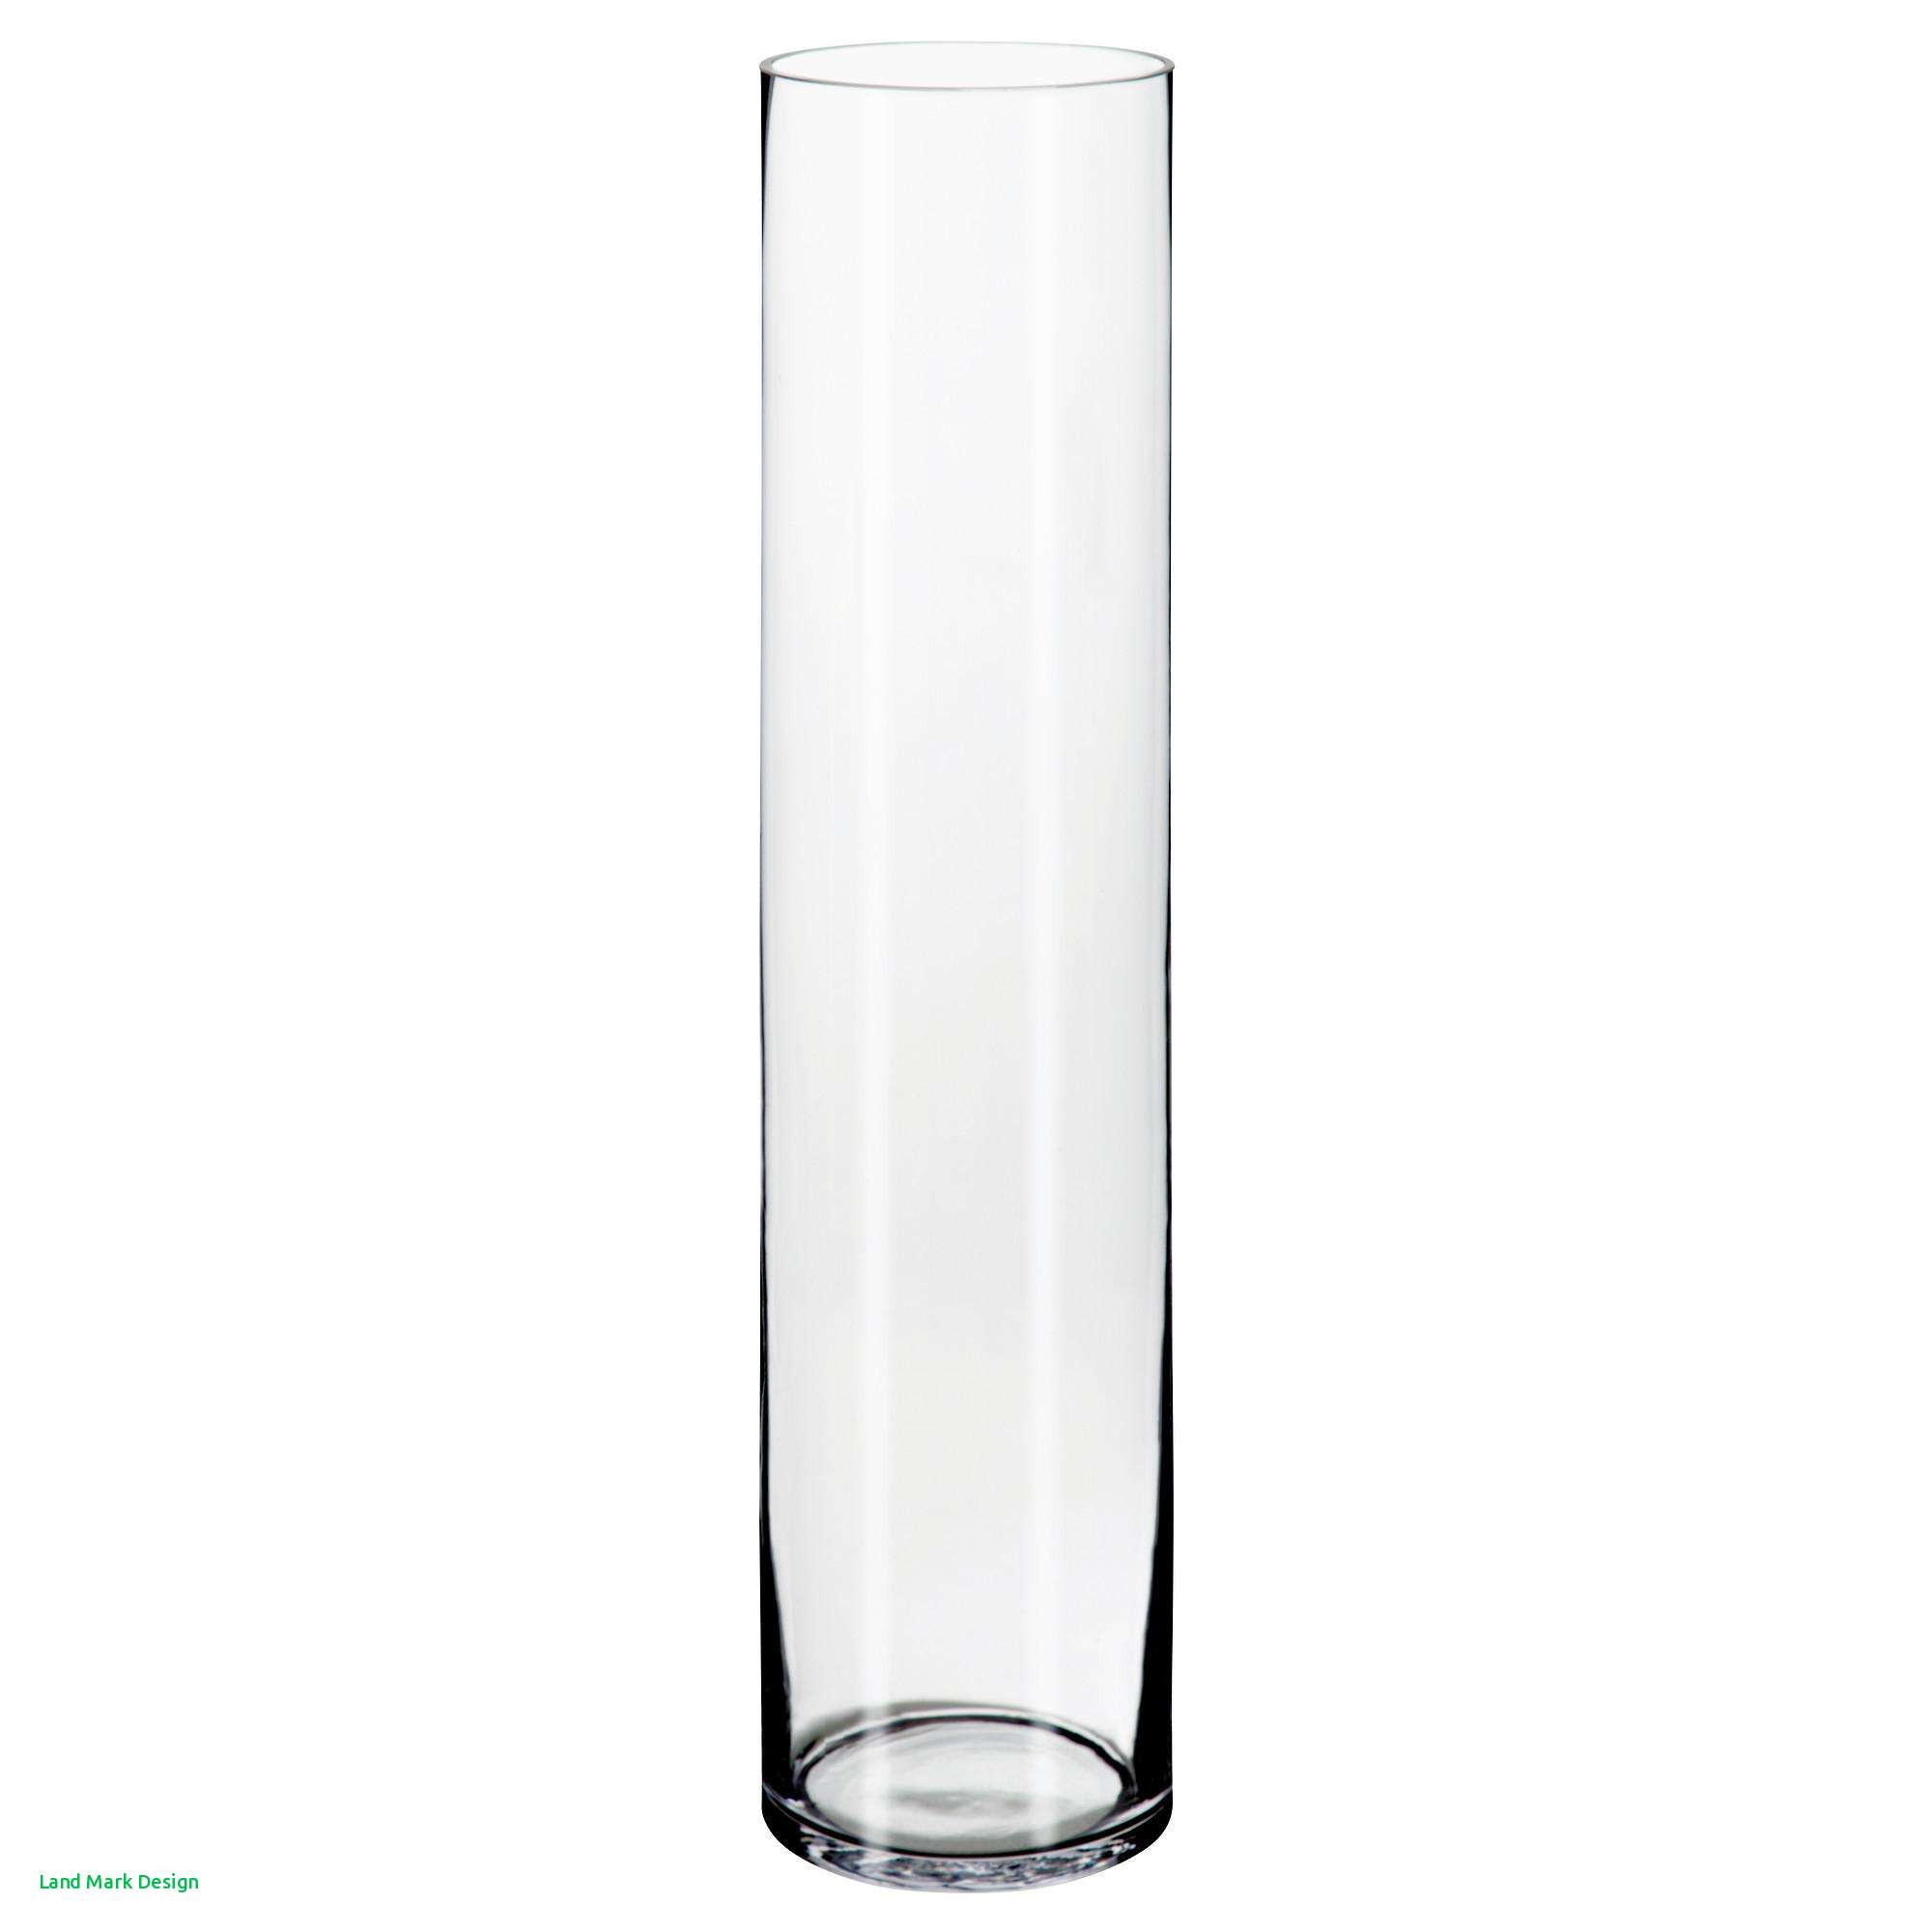 12 Cute Floor Standing Glass Vase 2023 free download floor standing glass vase of ikea floor vases design home design within full size of living room vase glass fresh pe s5h vases ikea floor vase i large